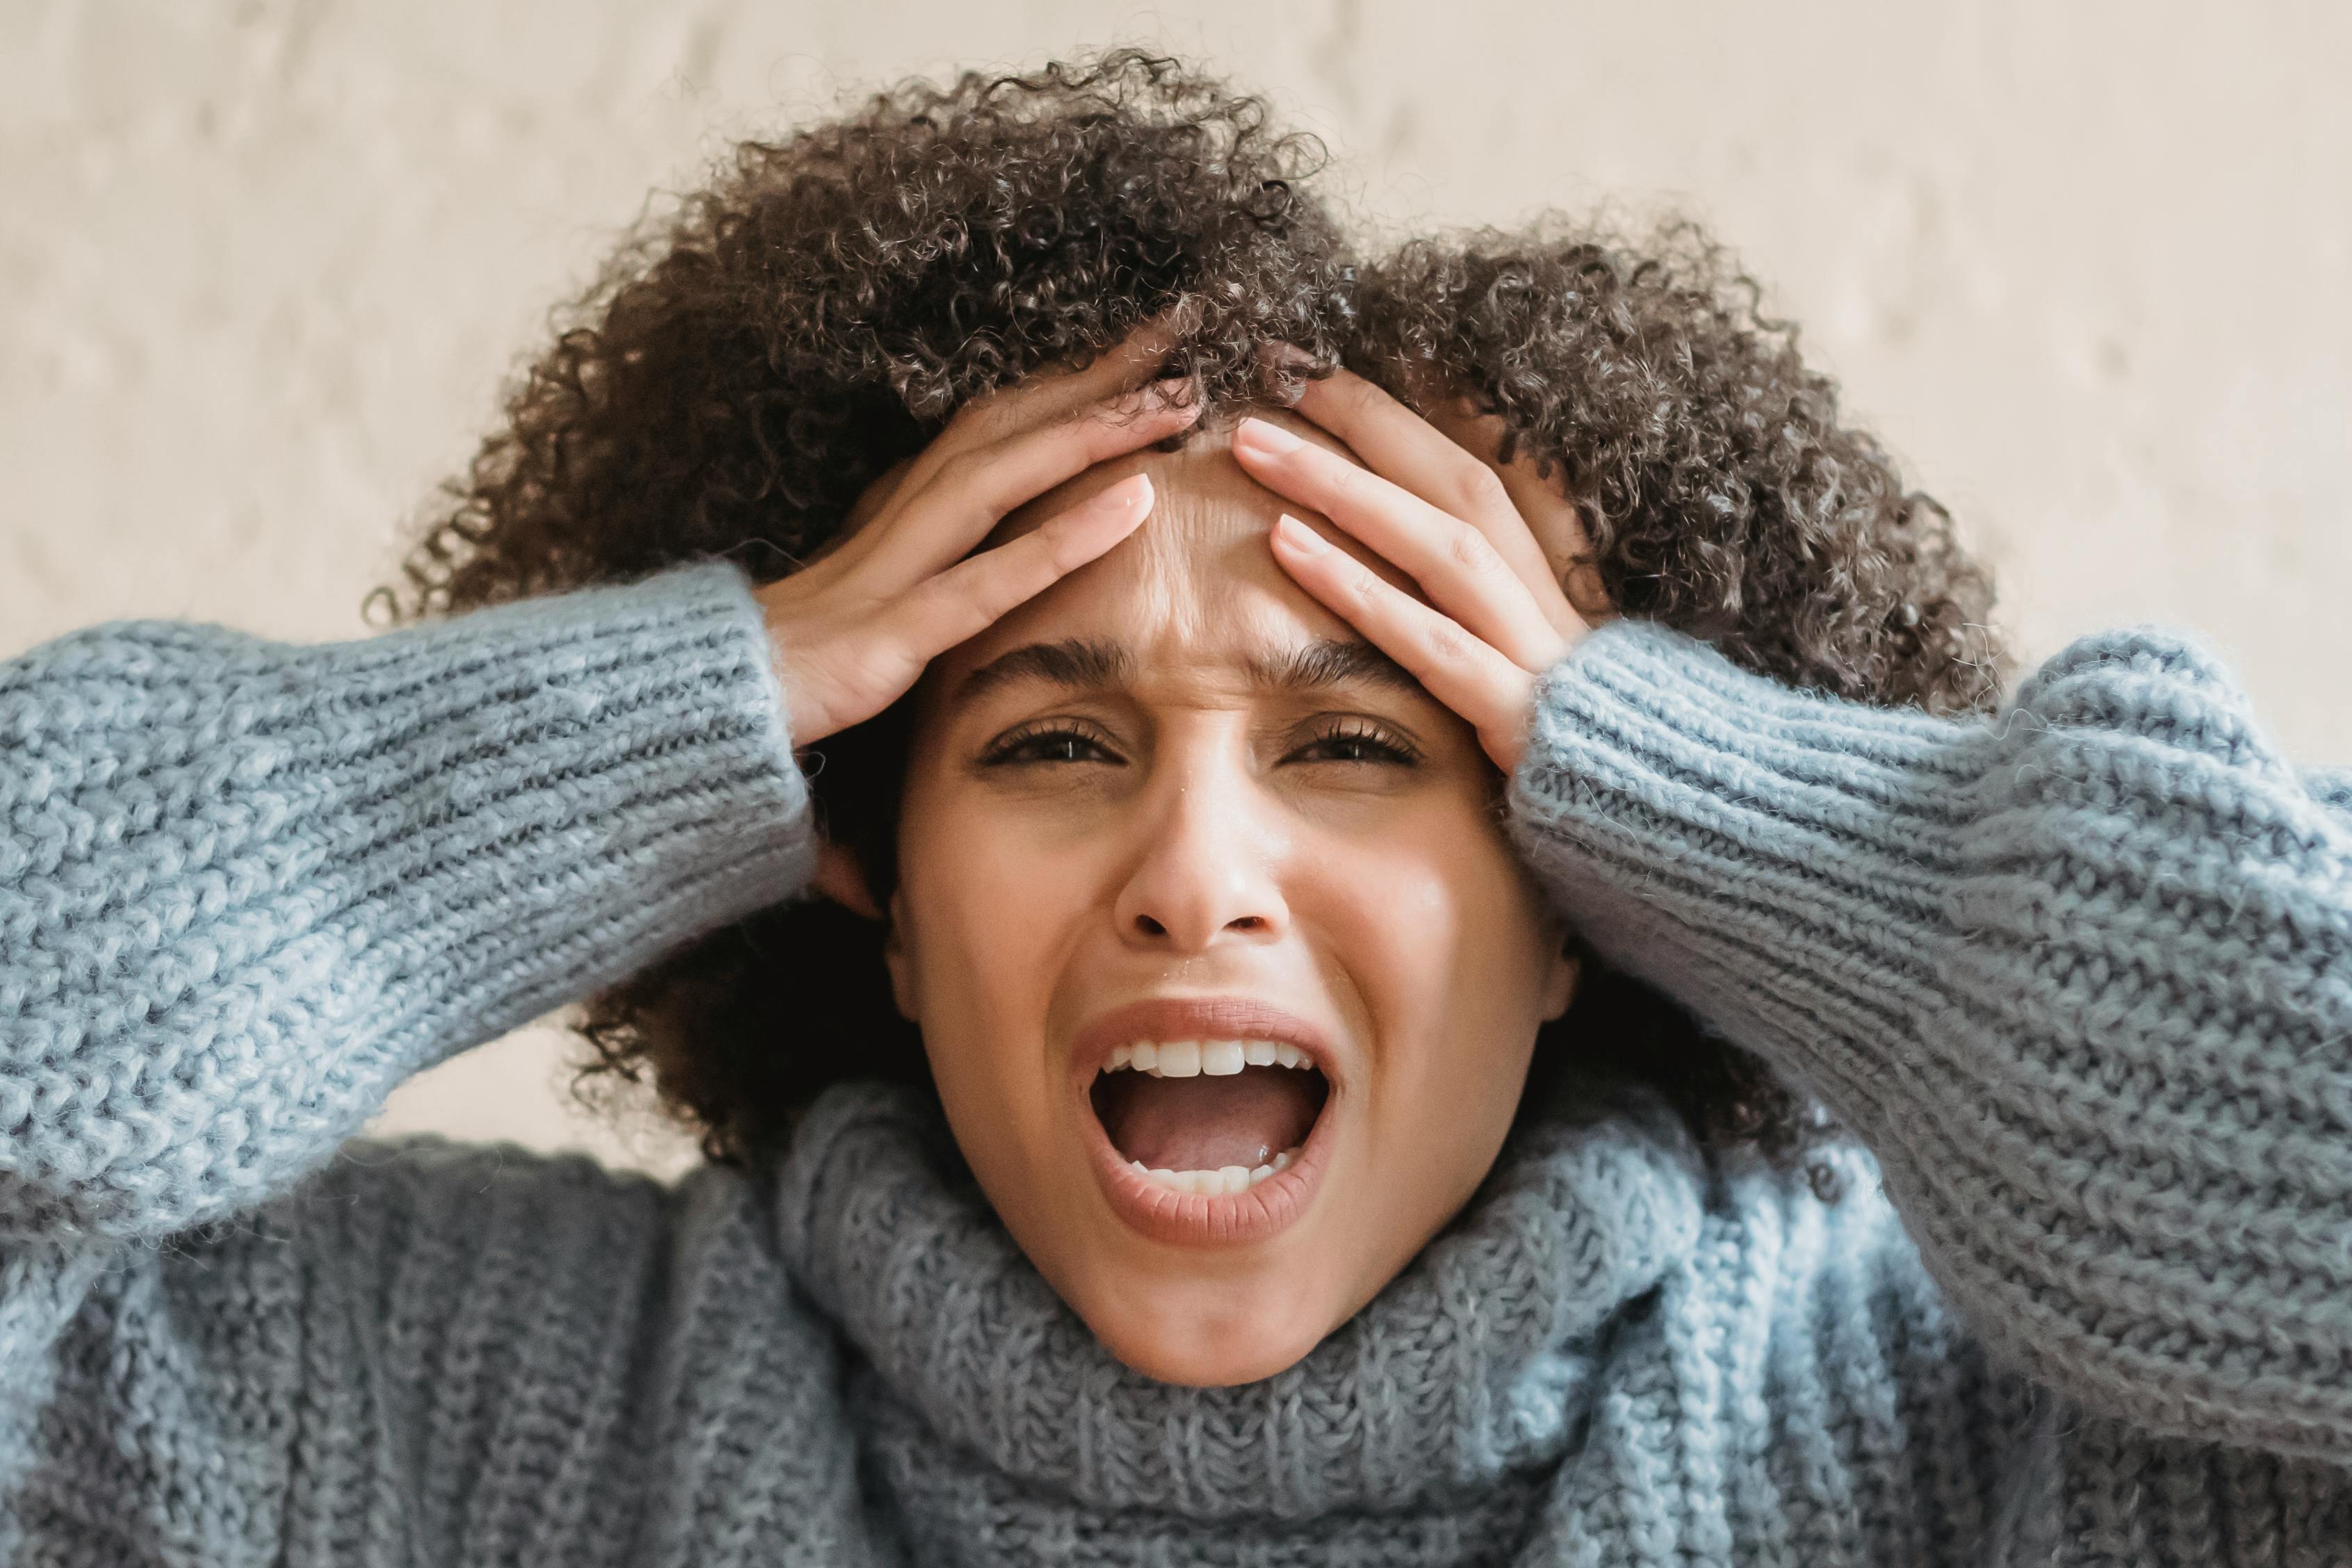 A woman looking shocked and in disbelief | Source: Pexels